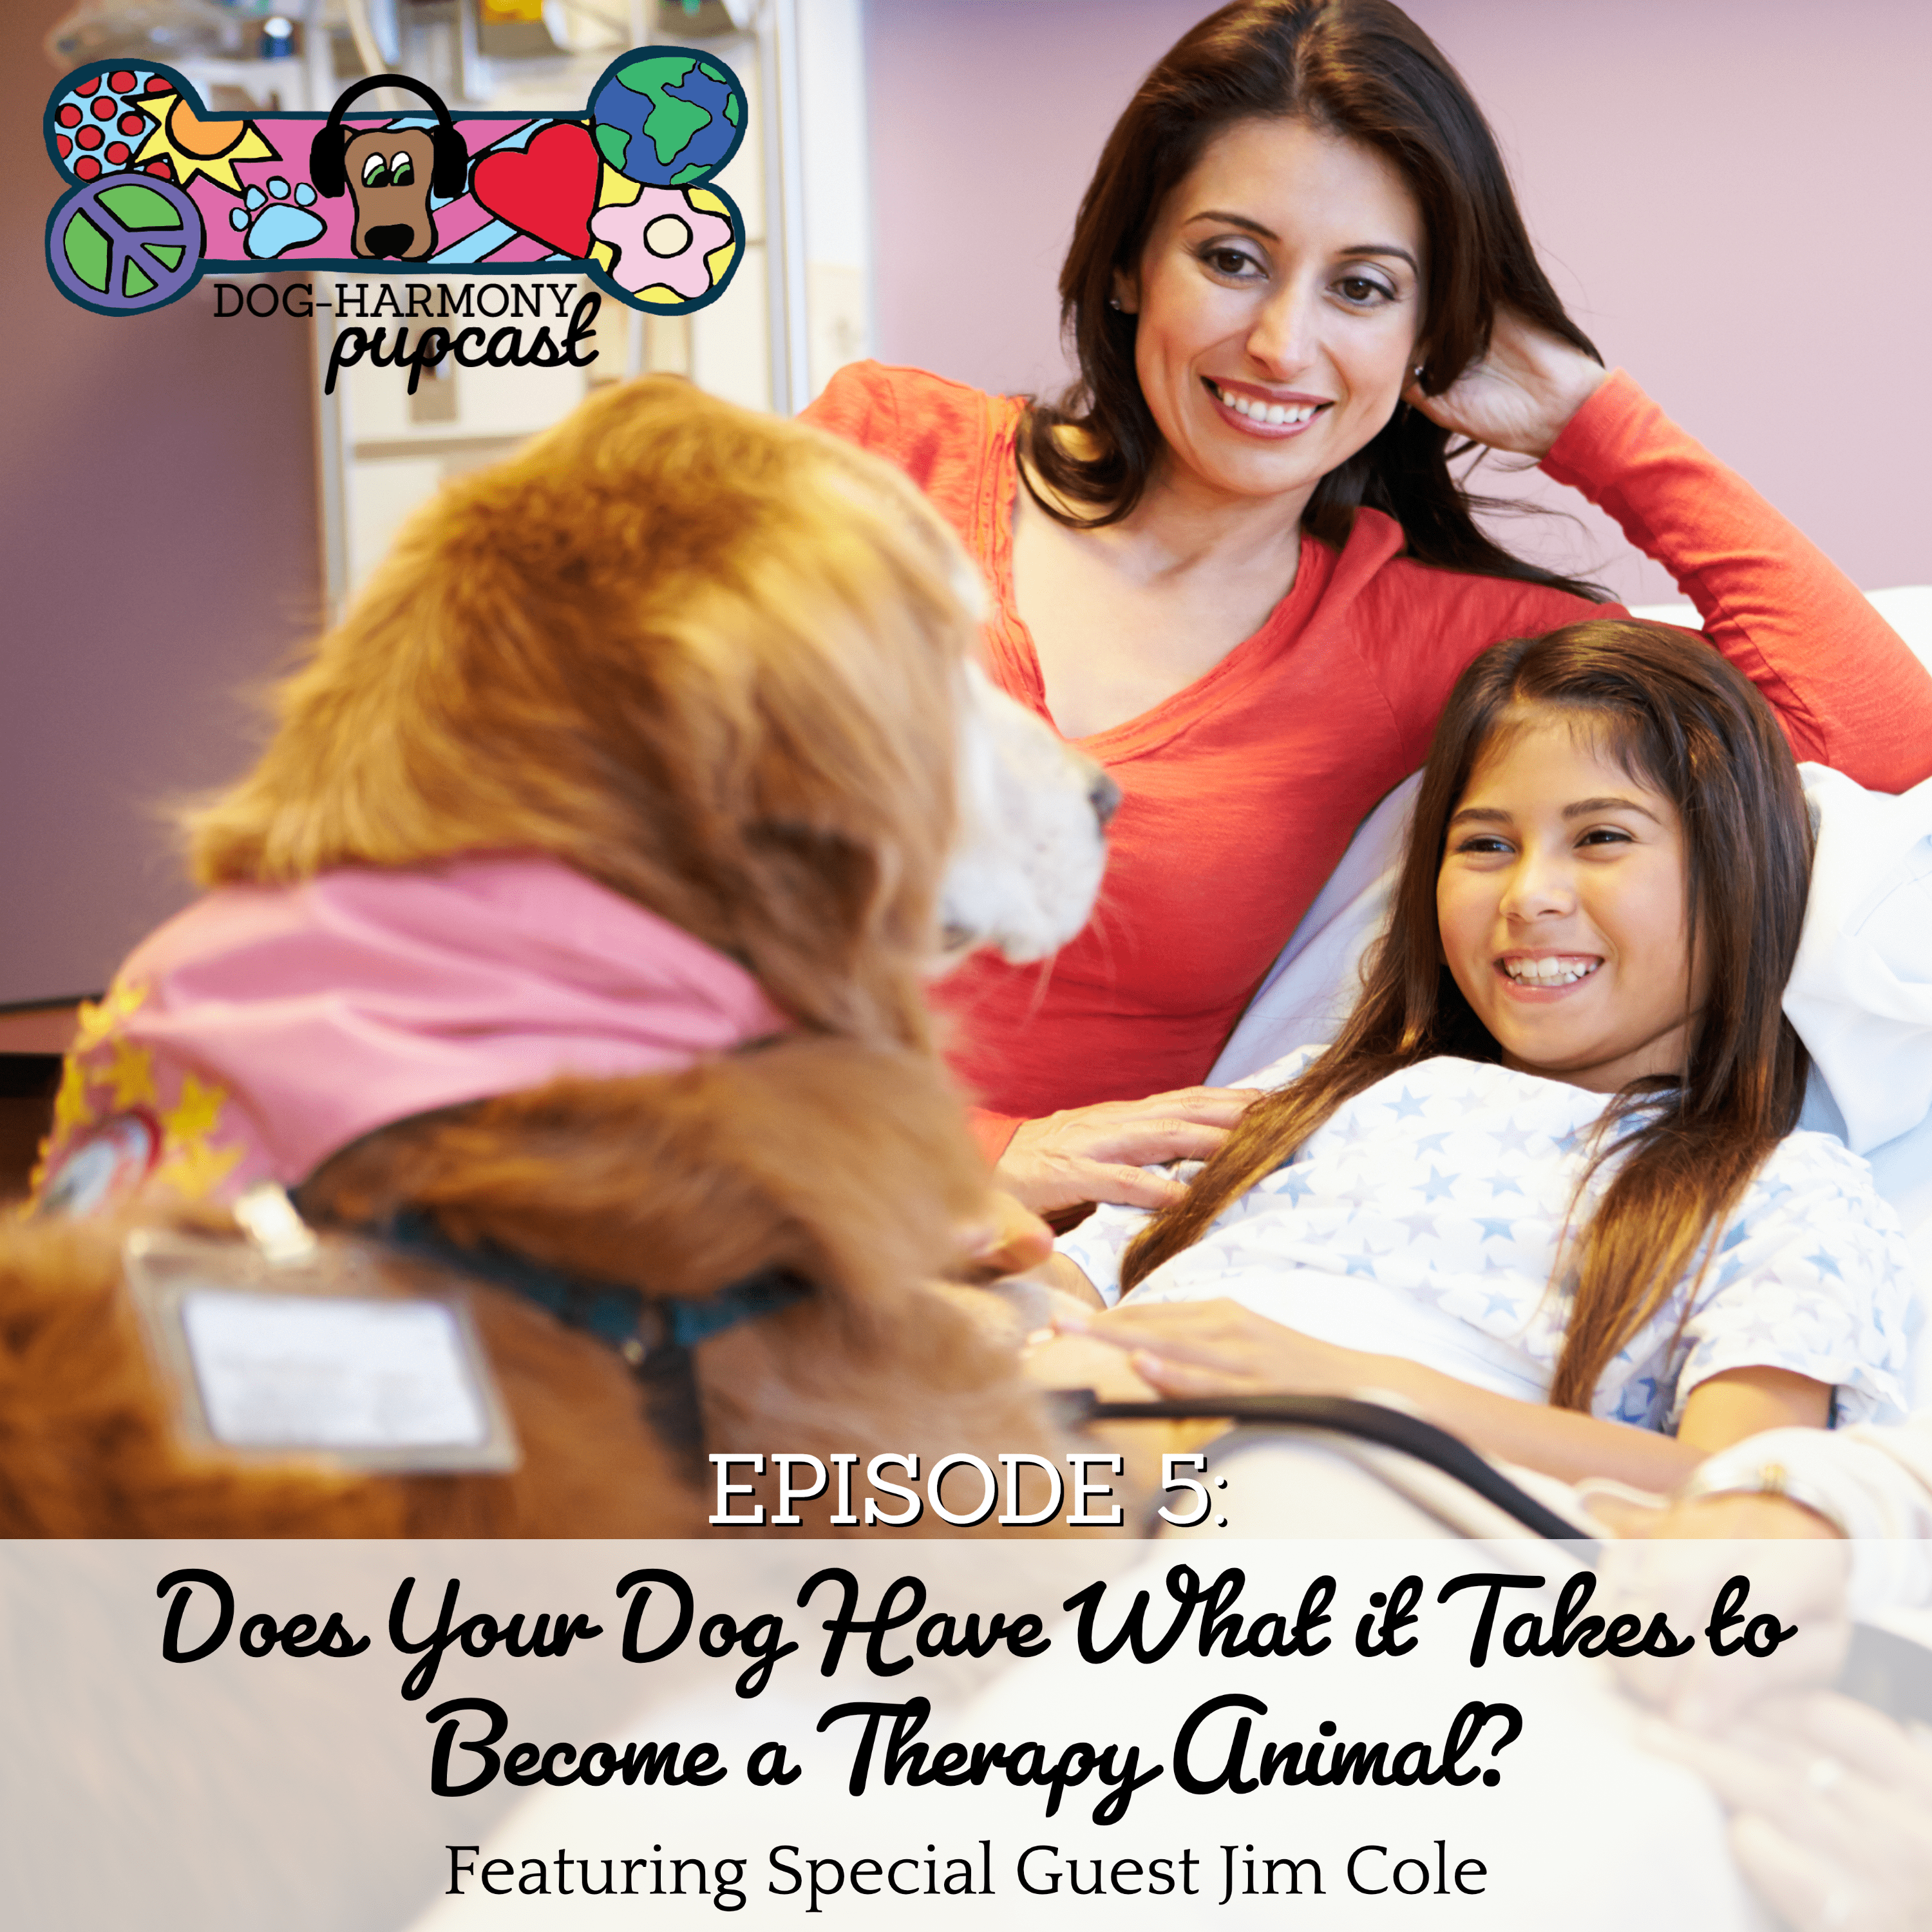 Episode 6: Does Your Dog Have What it Takes to Become a Therapy Animal?